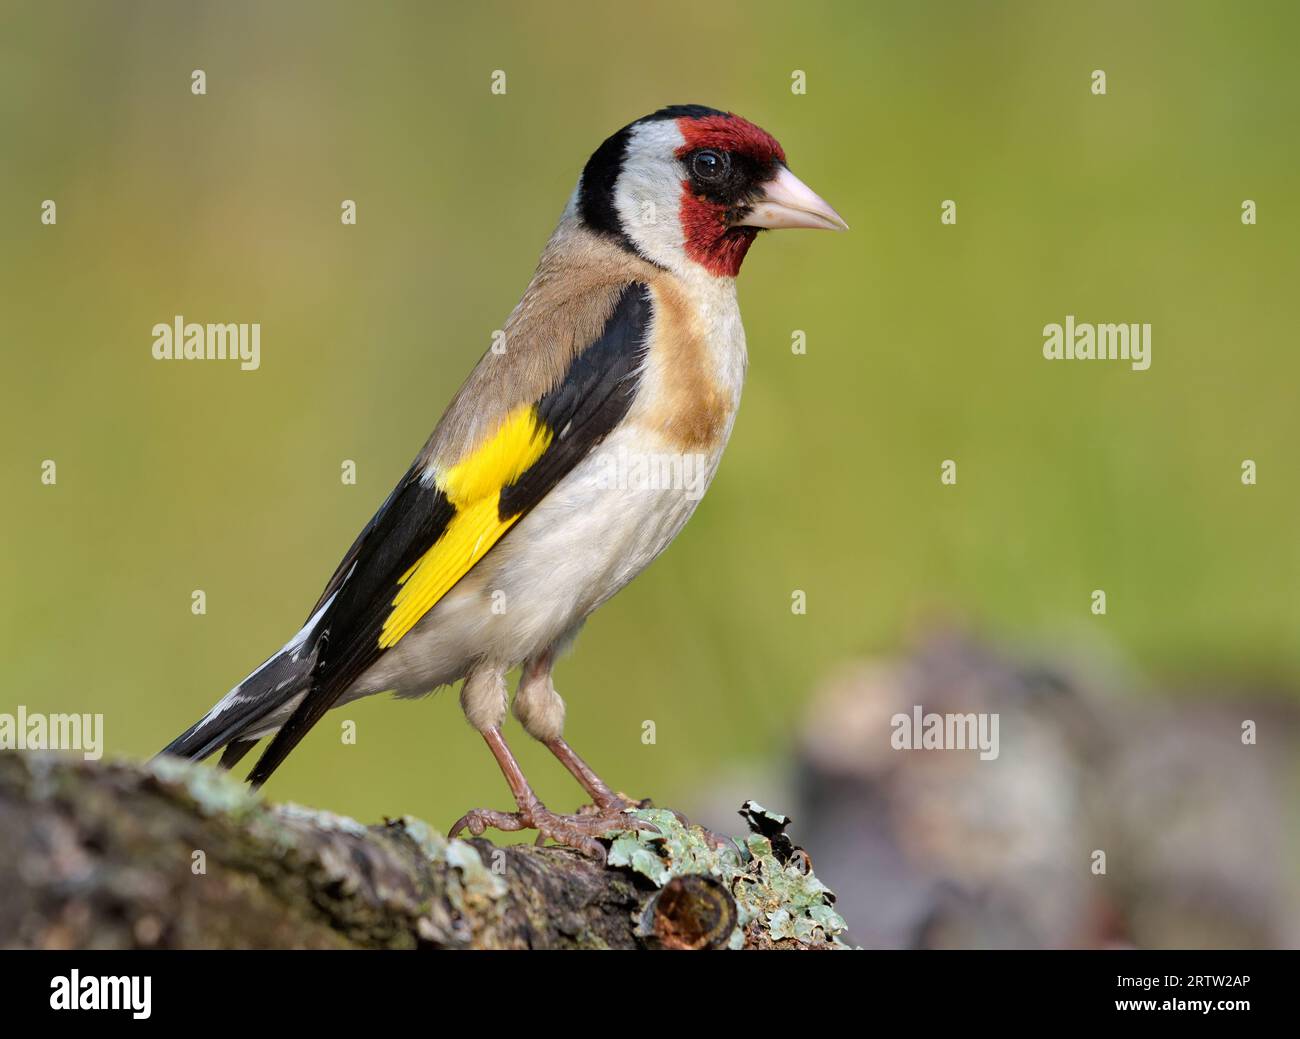 European goldfinch (Carduelis carduelis) perched on lichen covered branch in full plumage beauty Stock Photo